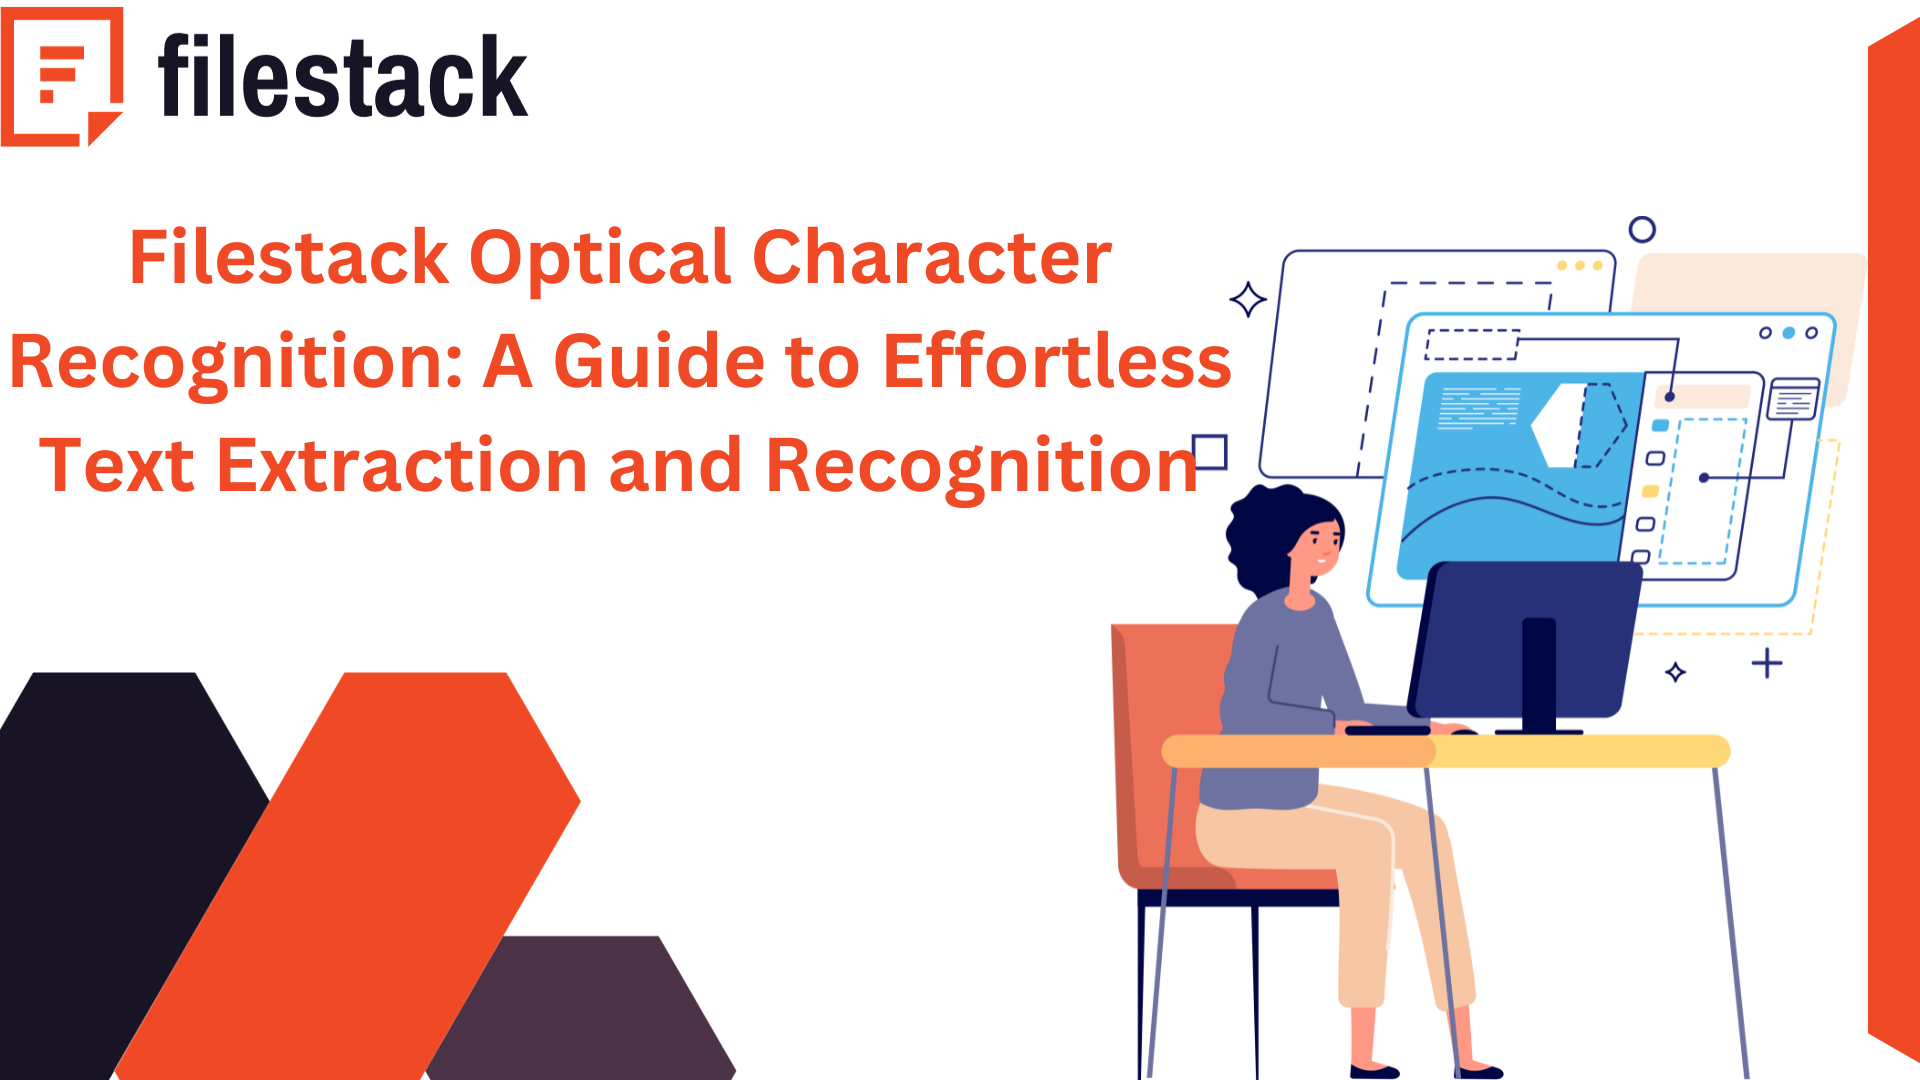 Filestack Optical Character Recognition: A Guide to Effortless Text Extraction and Recognition